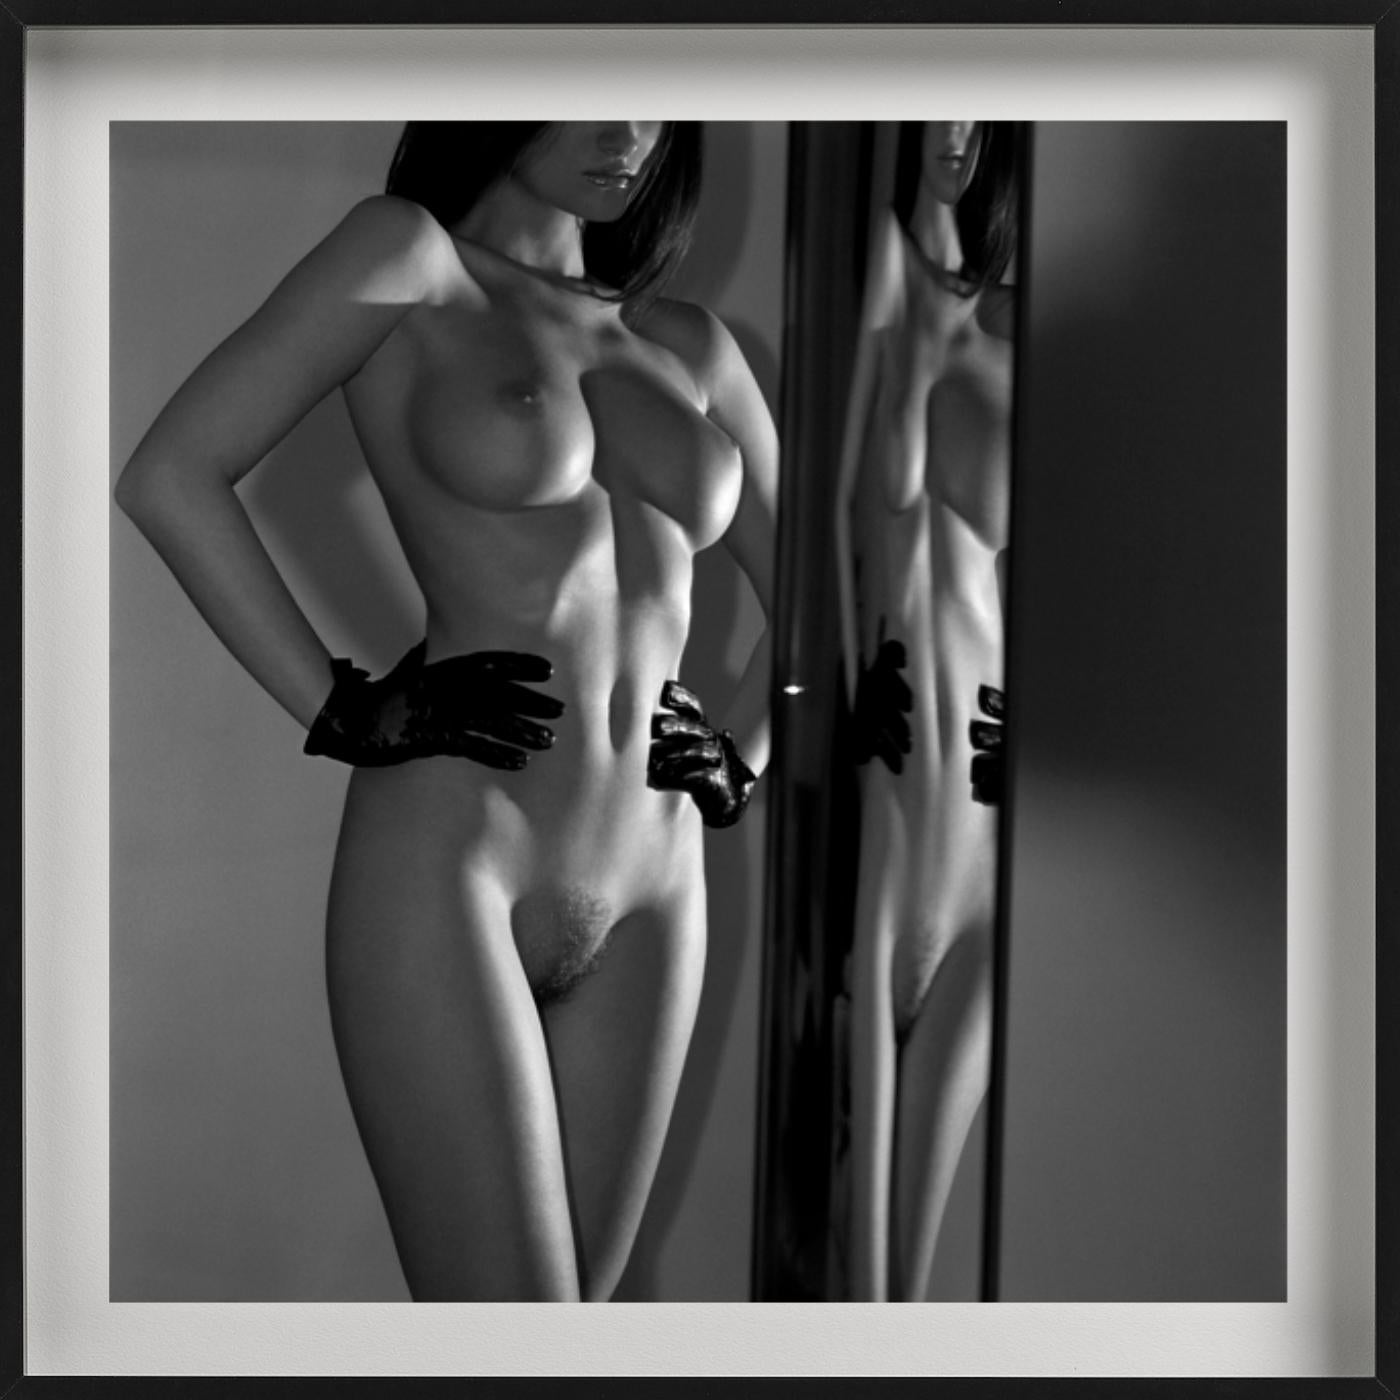 'Always moving upward' - nude with mirror, fine art photography, 2006 - Gray Black and White Photograph by Guido Argentini